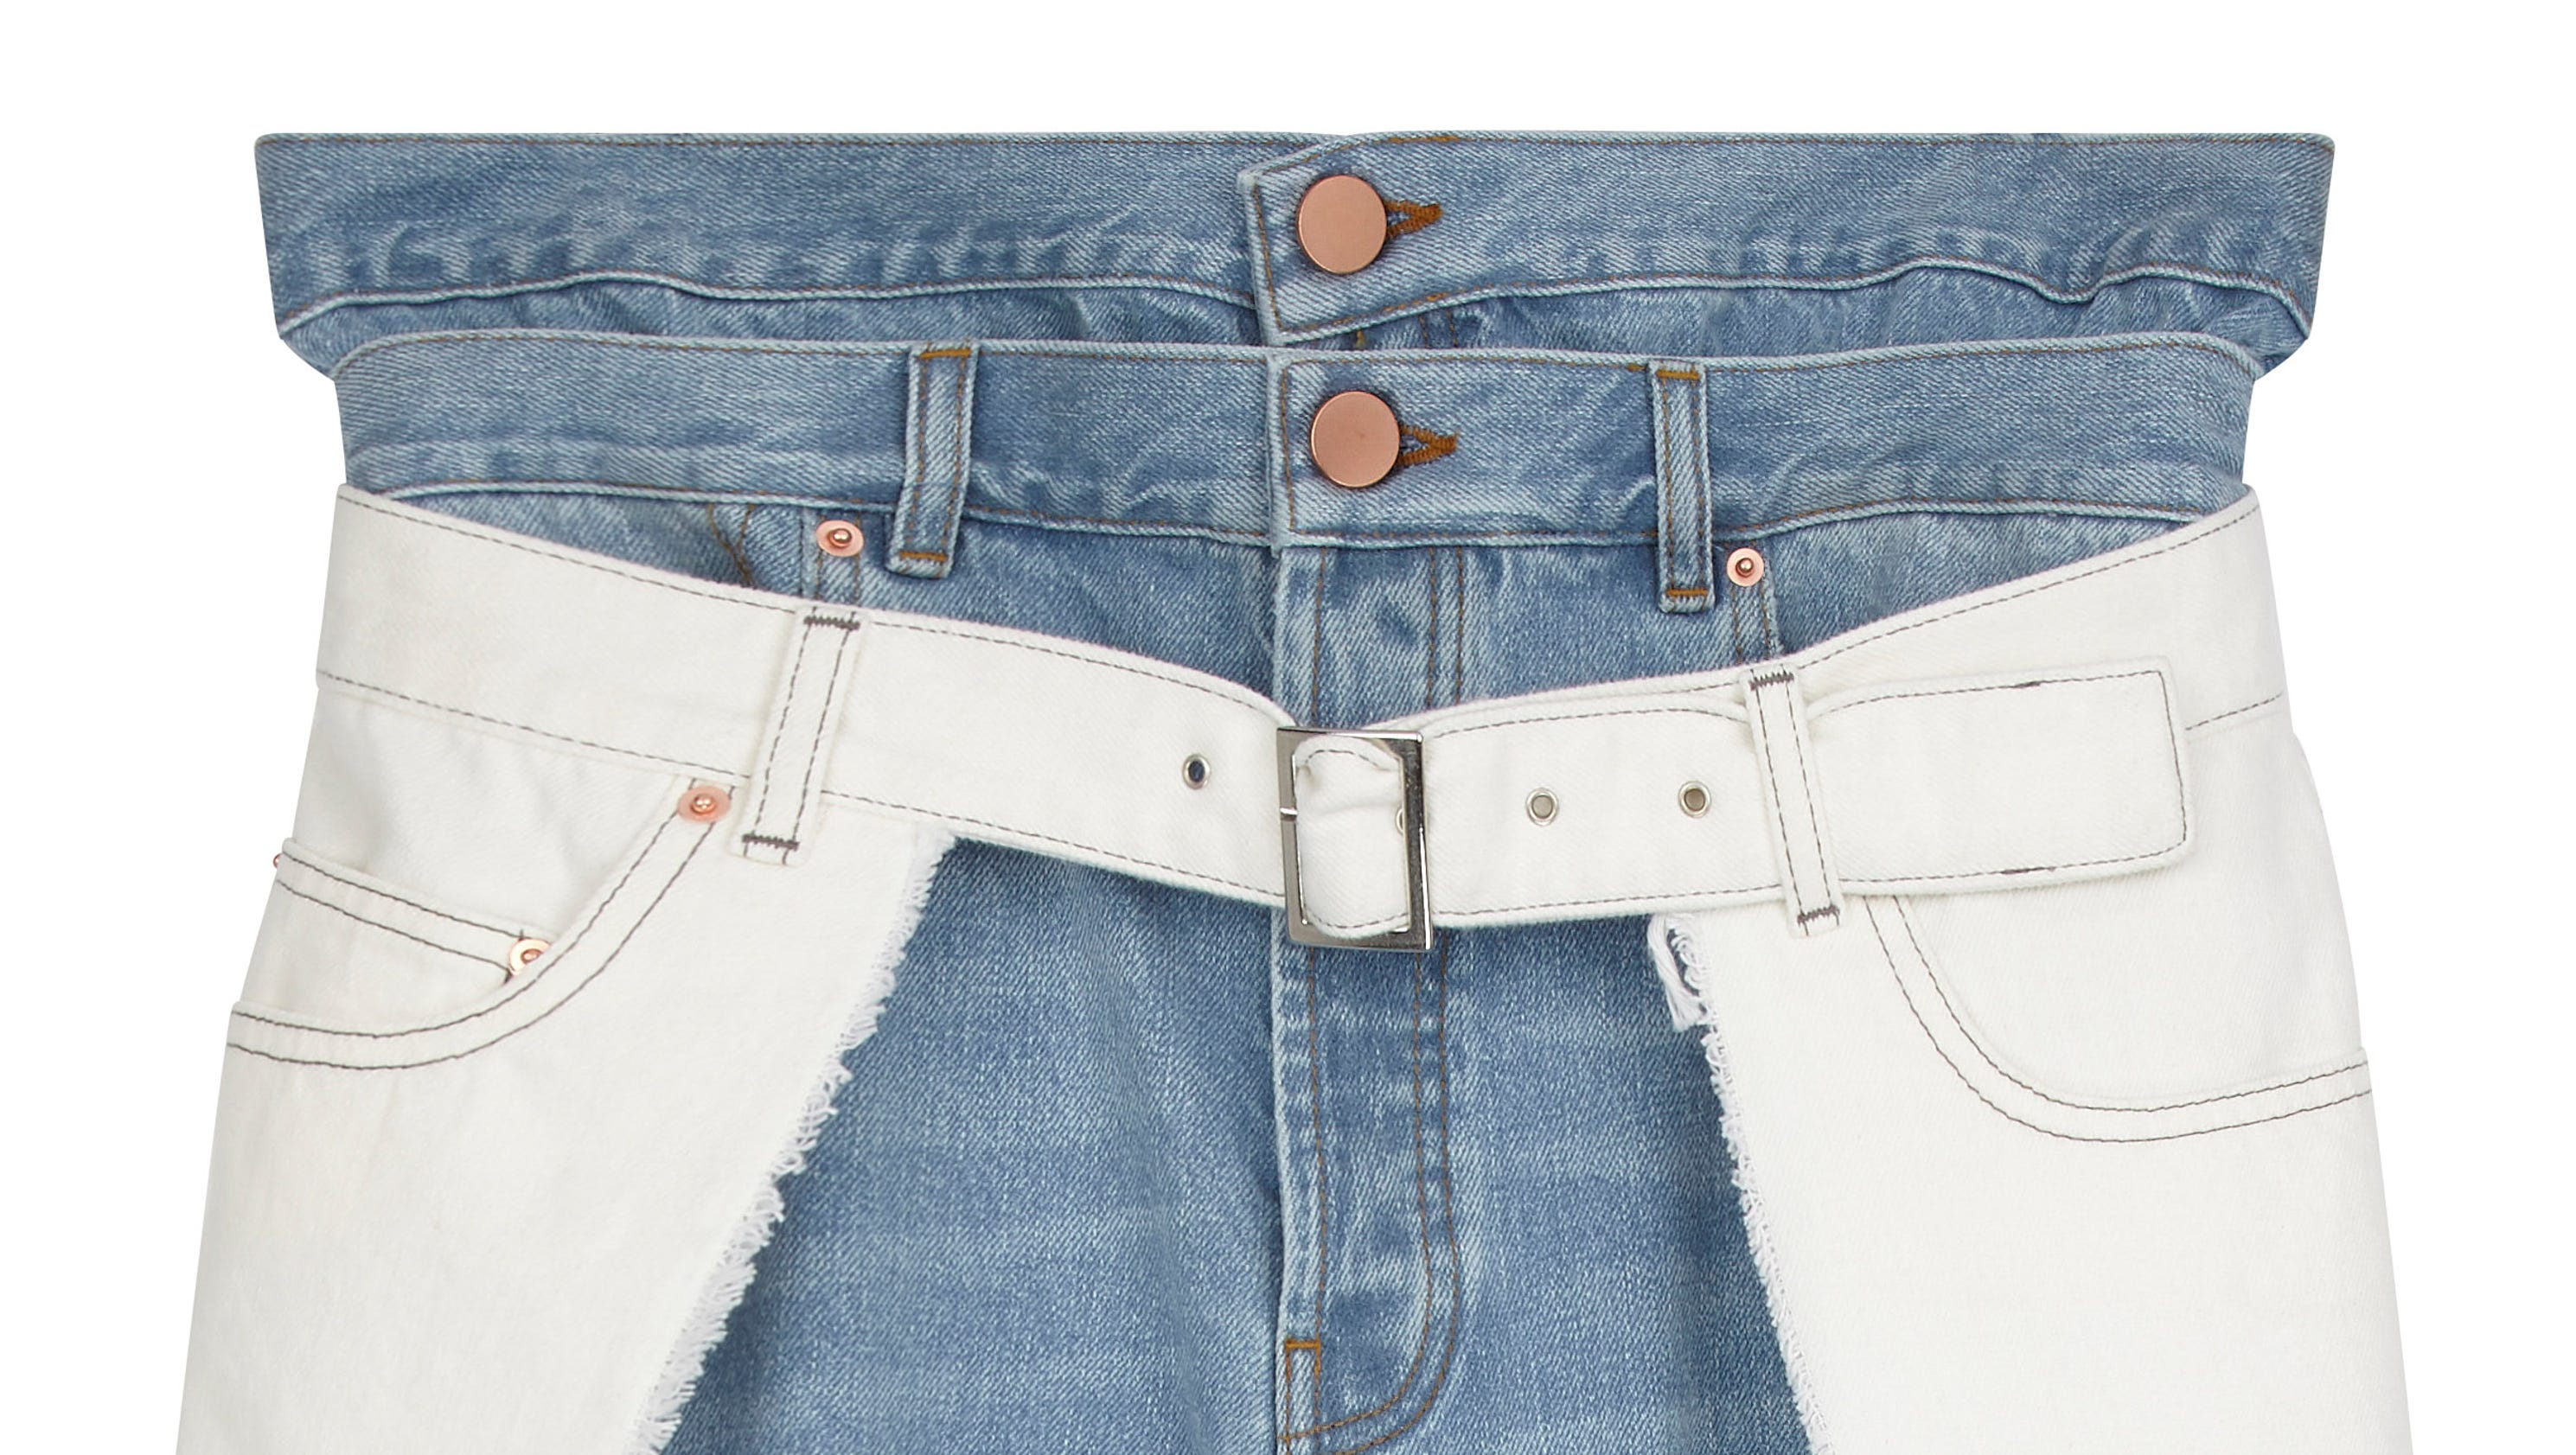 'Triple-waistband jeans' are the worst fashion trend of 2018